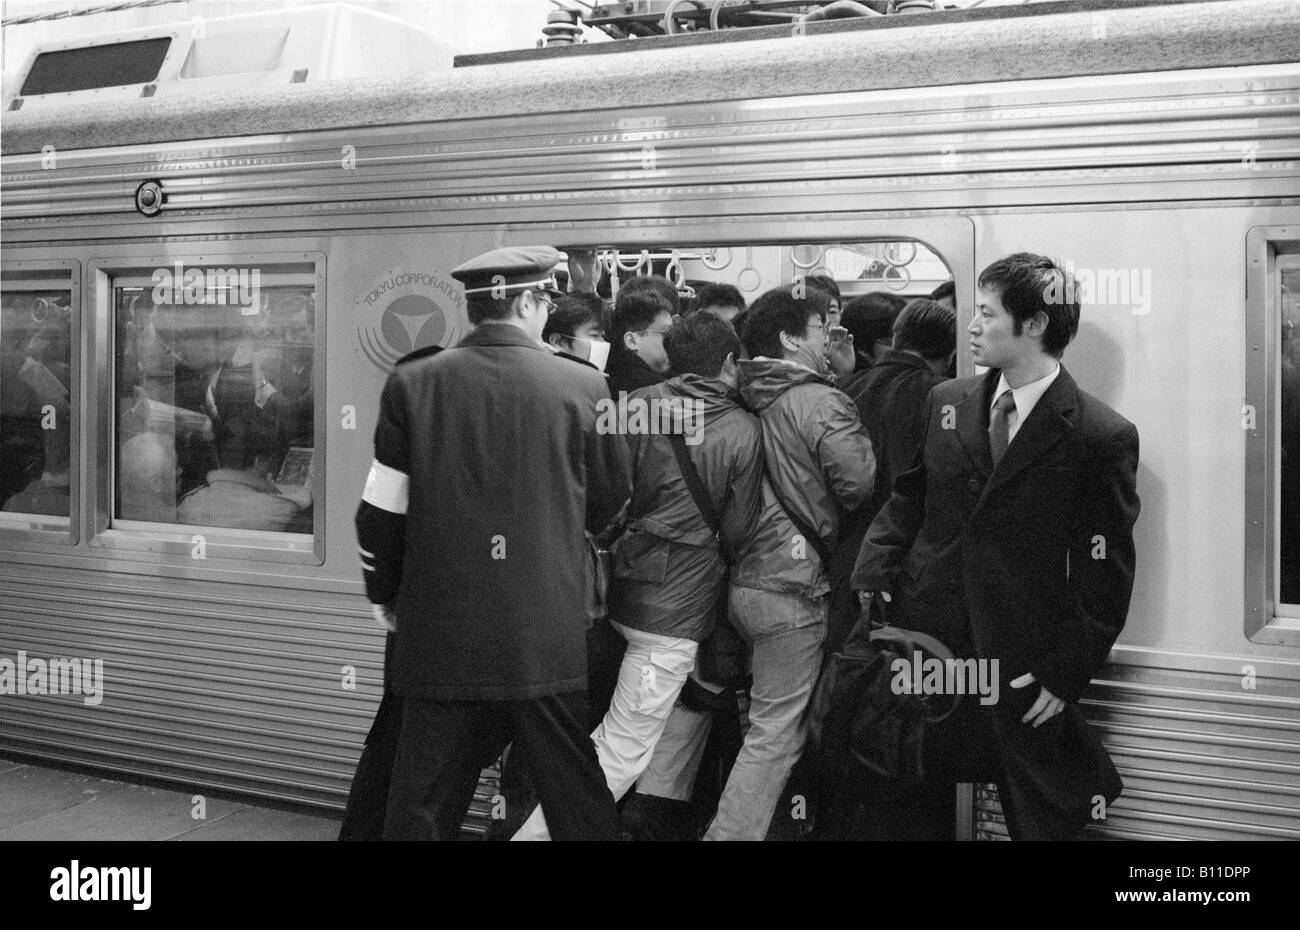 Feb 25, 2004 - Commuters being pushed into a train travelling from Yokohama to Tokyo at morning rush hour. Stock Photo